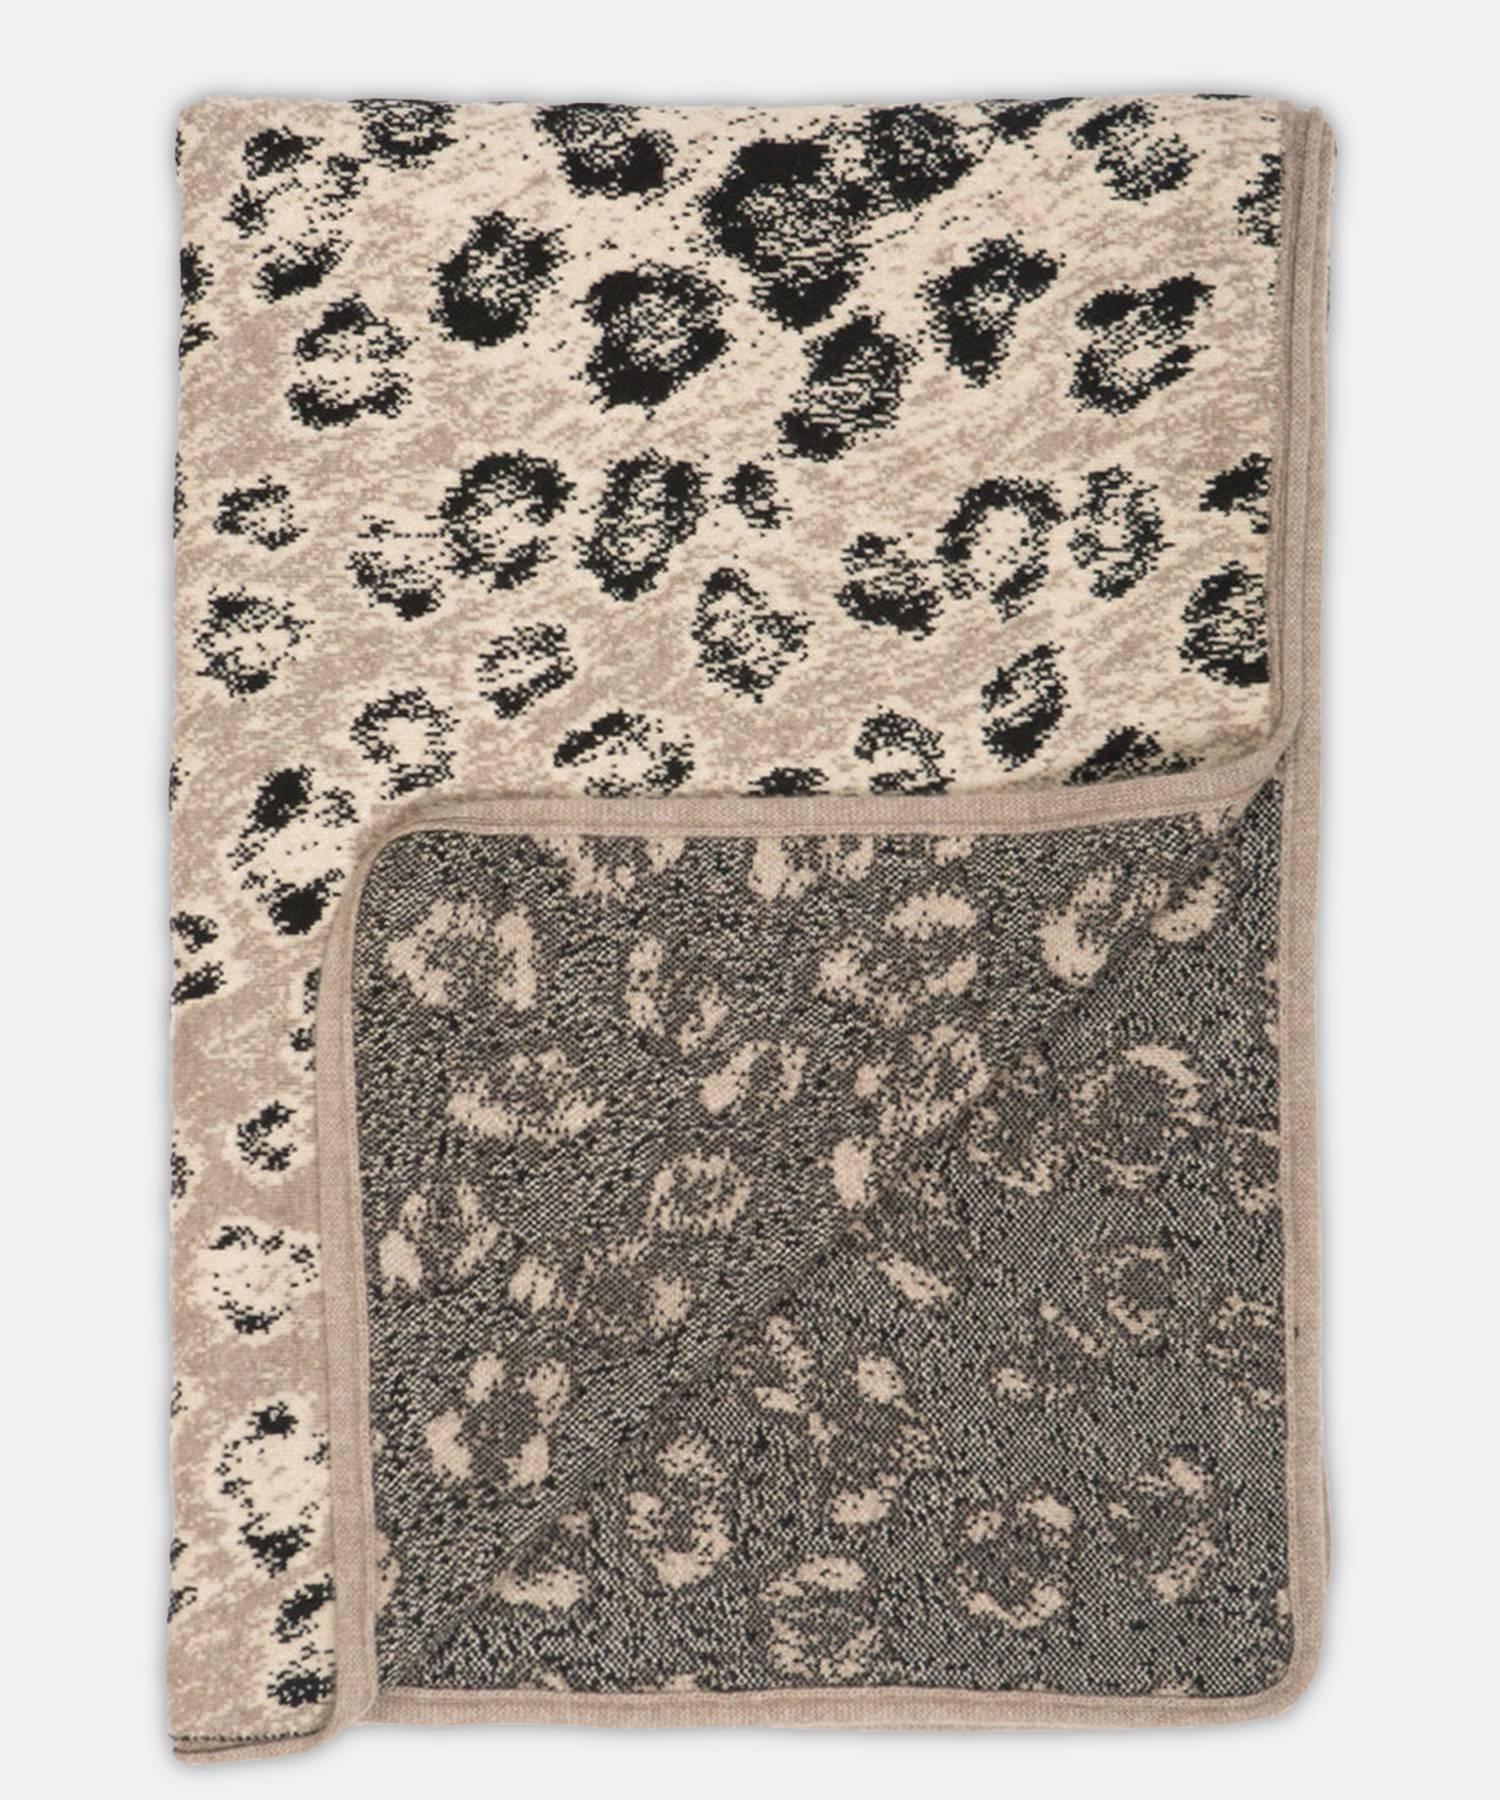 Mongolian Leopard Blanket by Saved, New York